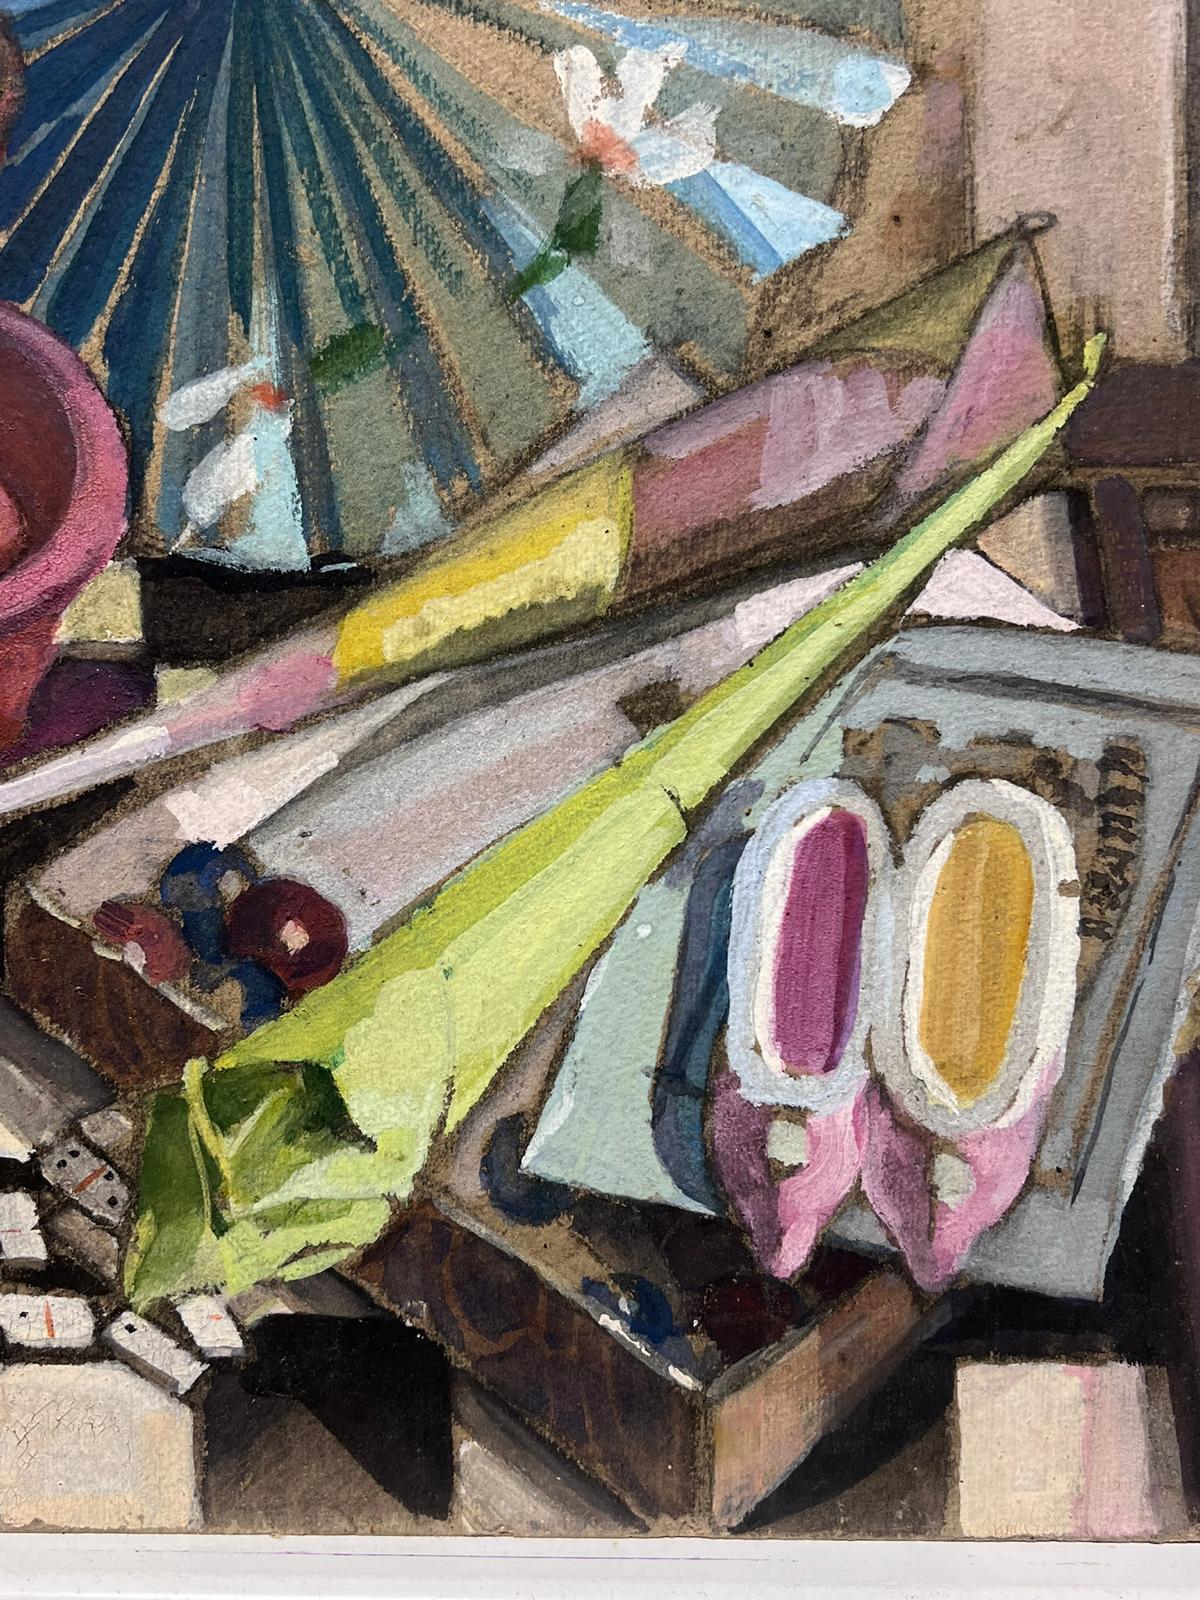 Still Life
by Louise Alix (French, 1888-1980) *see notes below
provenance stamp to the back  
oil painting on board, unframed
measures: 18 high by 15 inches wide
condition: overall very good and sound, a few scuffs and marks to the surface and wear